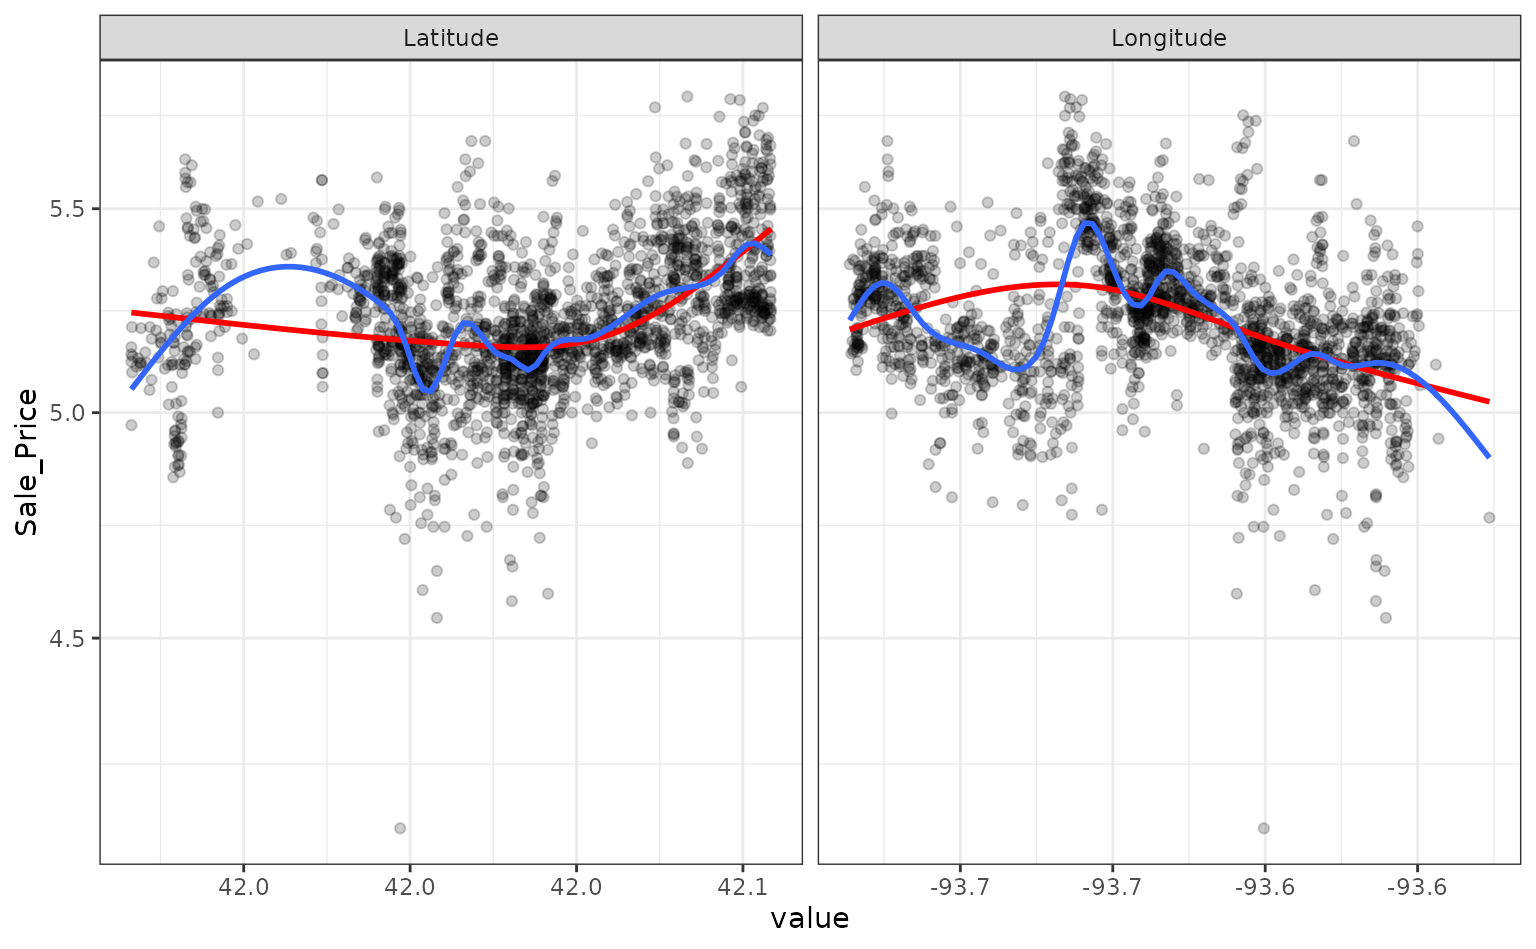 A scatterplot much like the first one, except that a smoother, red line, representing a spline term with fewer degrees of freedom, is also plotted. The red line is much smoother but accounts for the less of the variation shown.